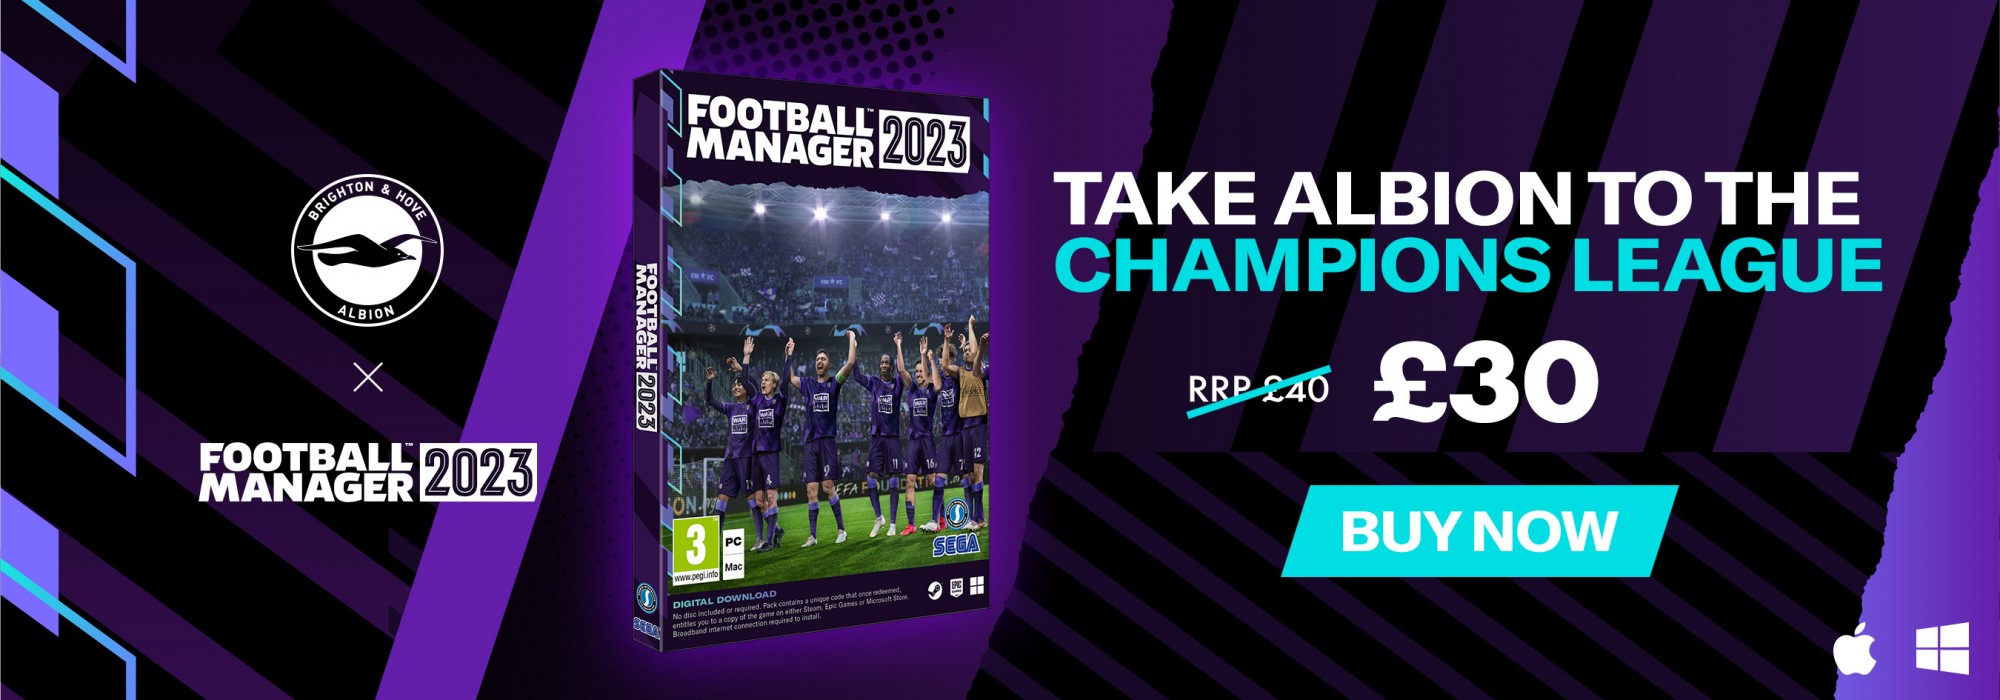 Football Manager 2023 OUT NOW!